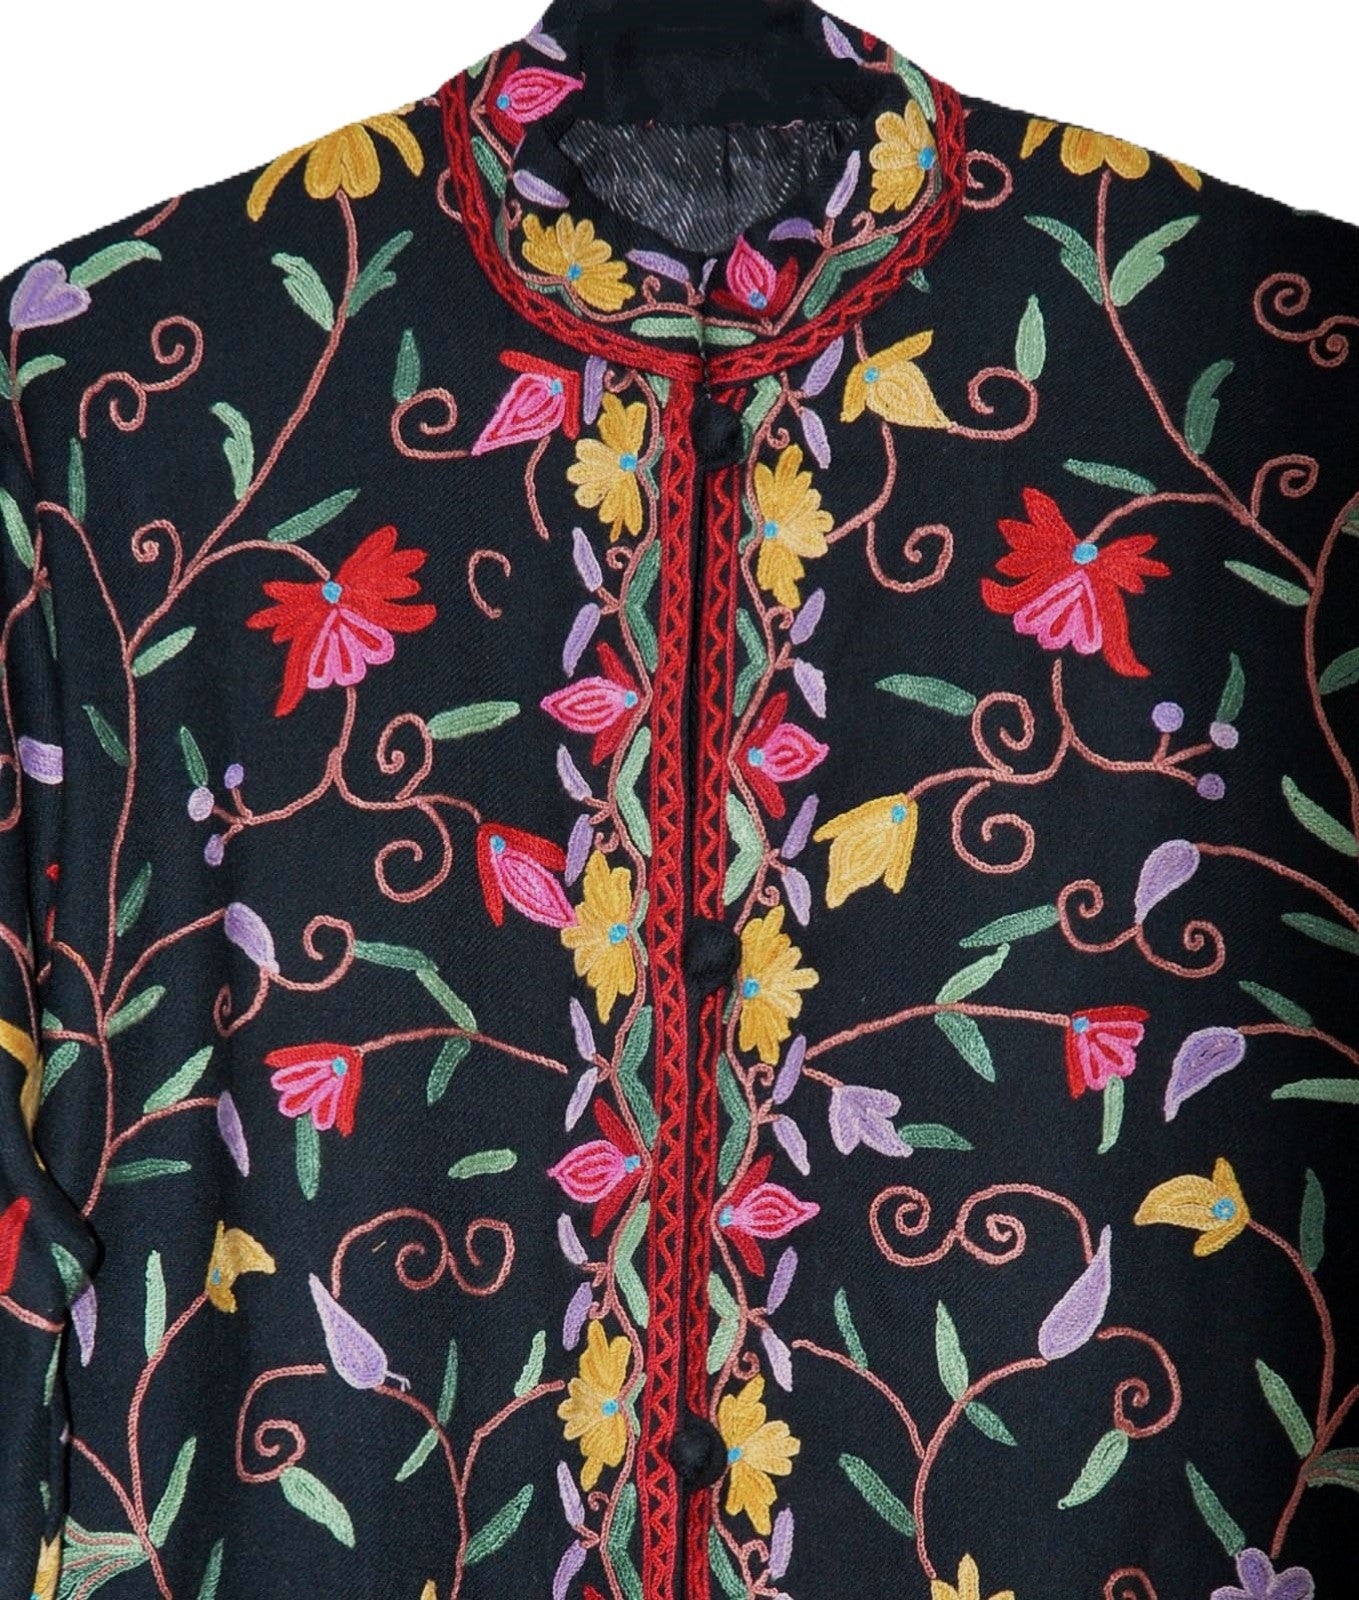 Embroidered Woolen Jacket Black, Multicolor Embroidery #AO-005